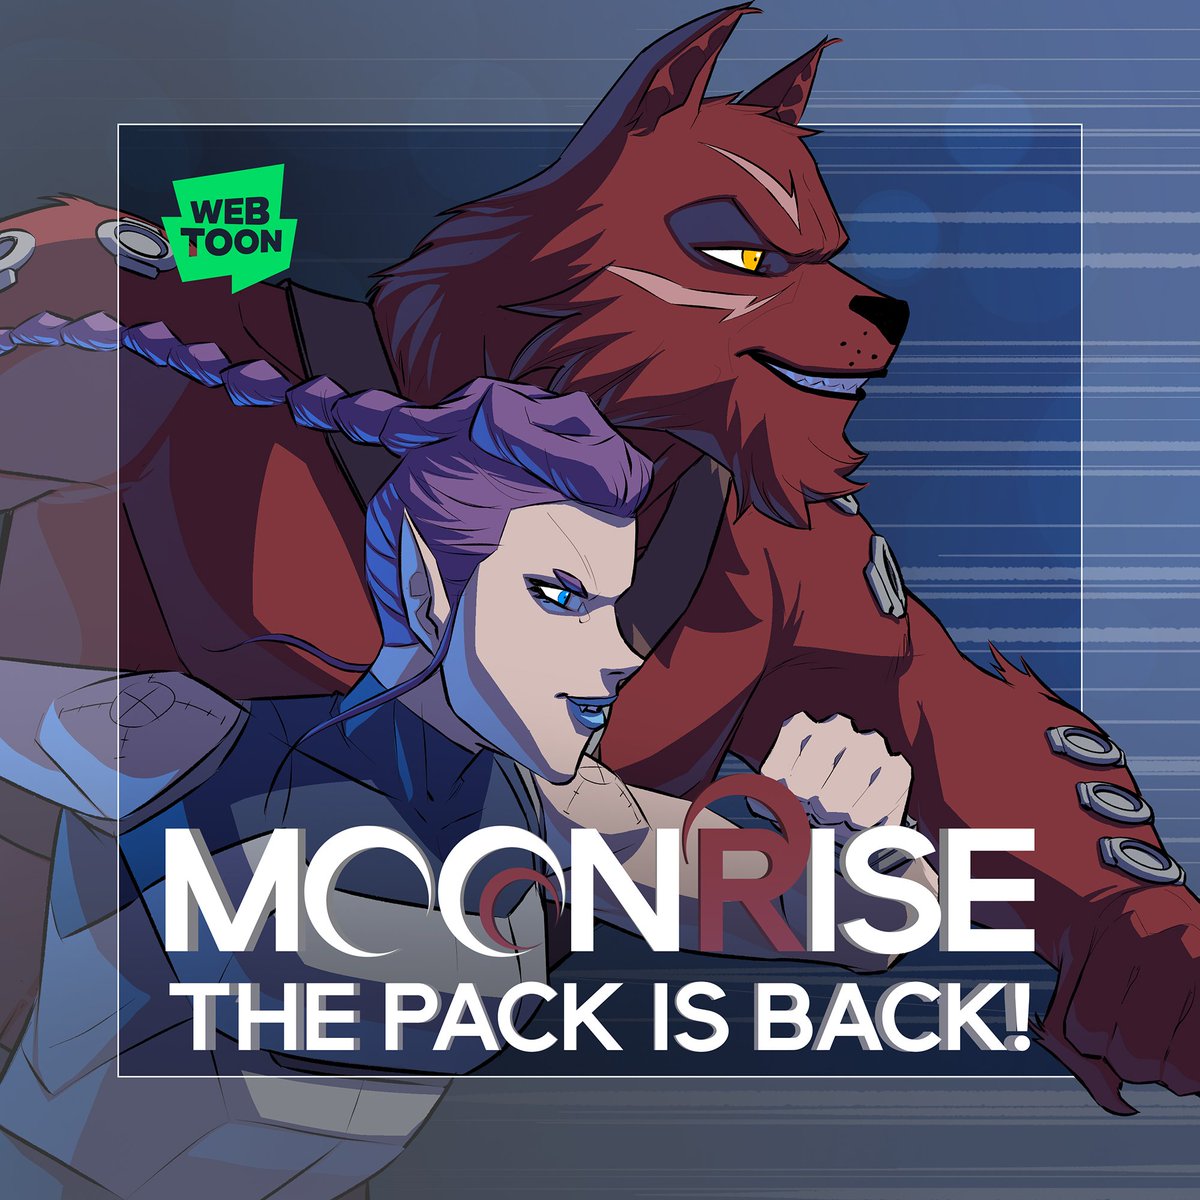 Did you hear? MoonRise returns on 02/22! We have so many stories to tell and are so excited for you all to read them. If you haven't check it out MoonRise is over on @webtoonofficial and it's FREE TO READ! Go check it out!

#moonrise #moonrisewebtoon #webtoon #comics #packstrong